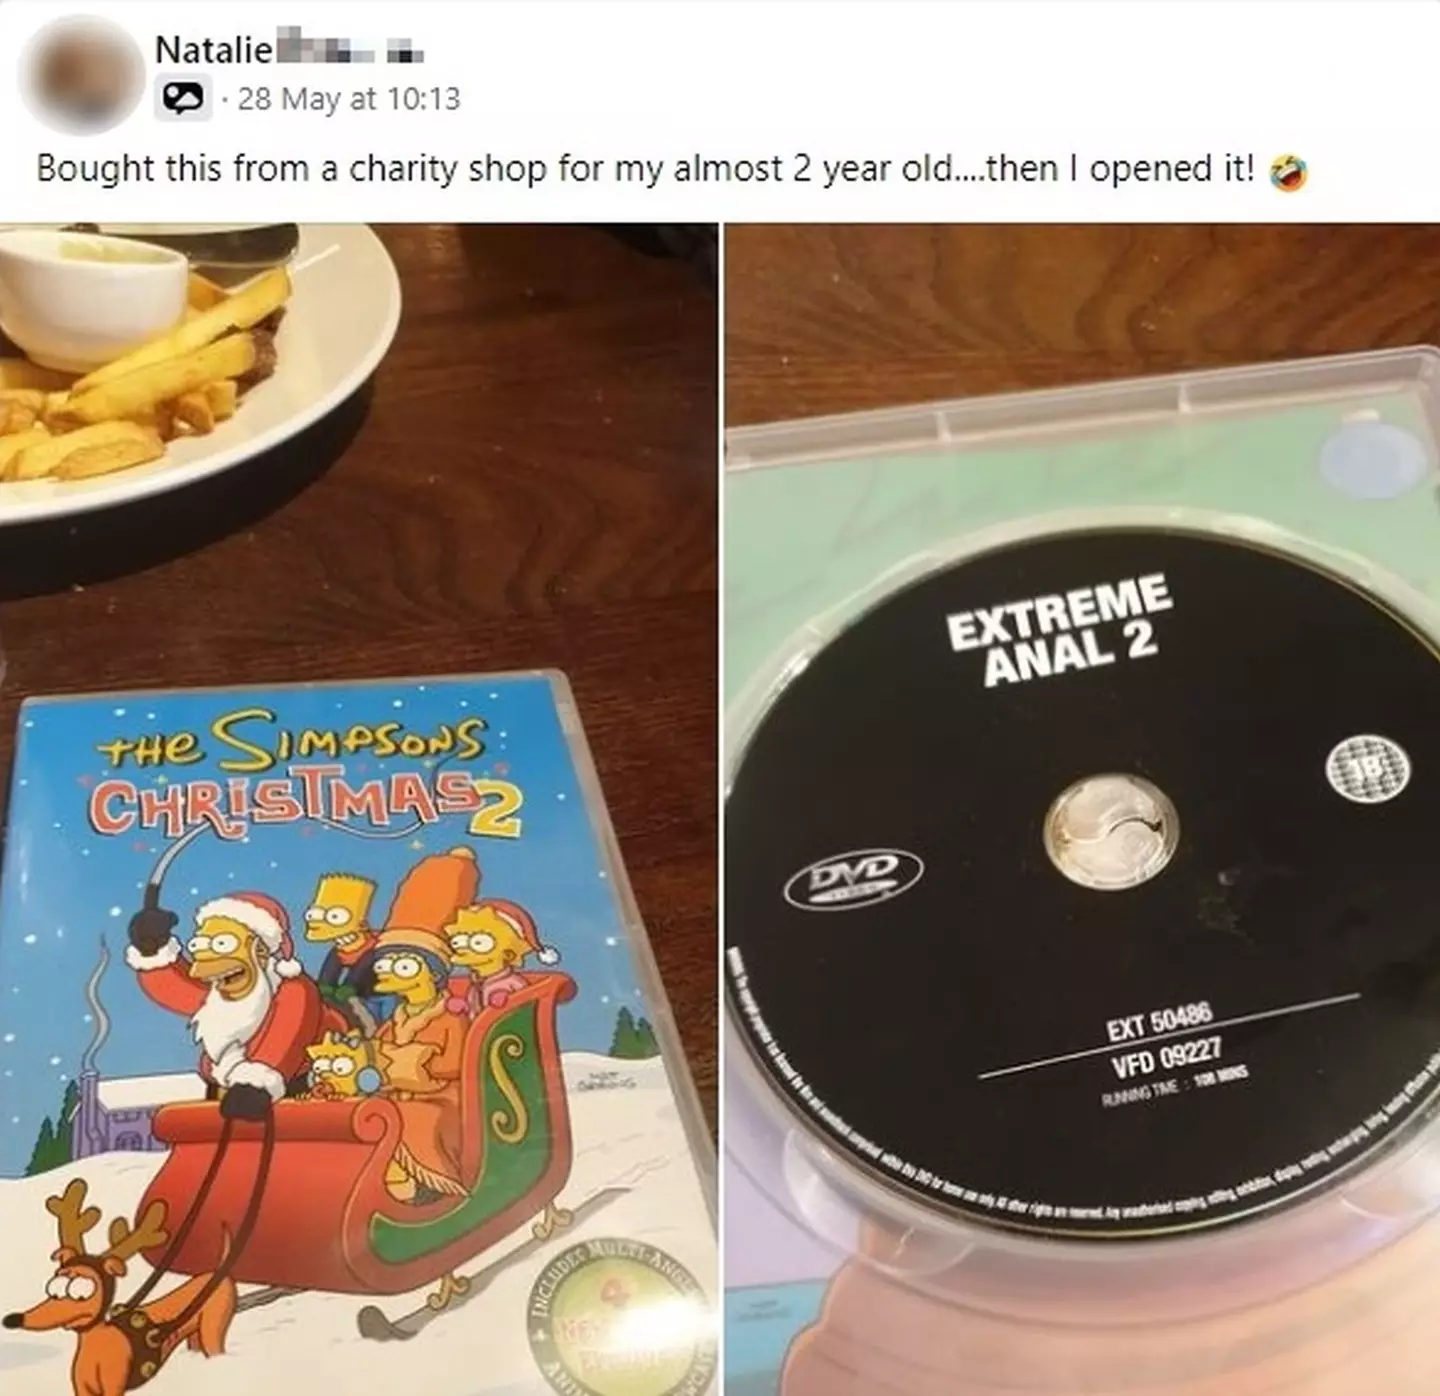 Mum Natalie shared her discovery on Facebook.